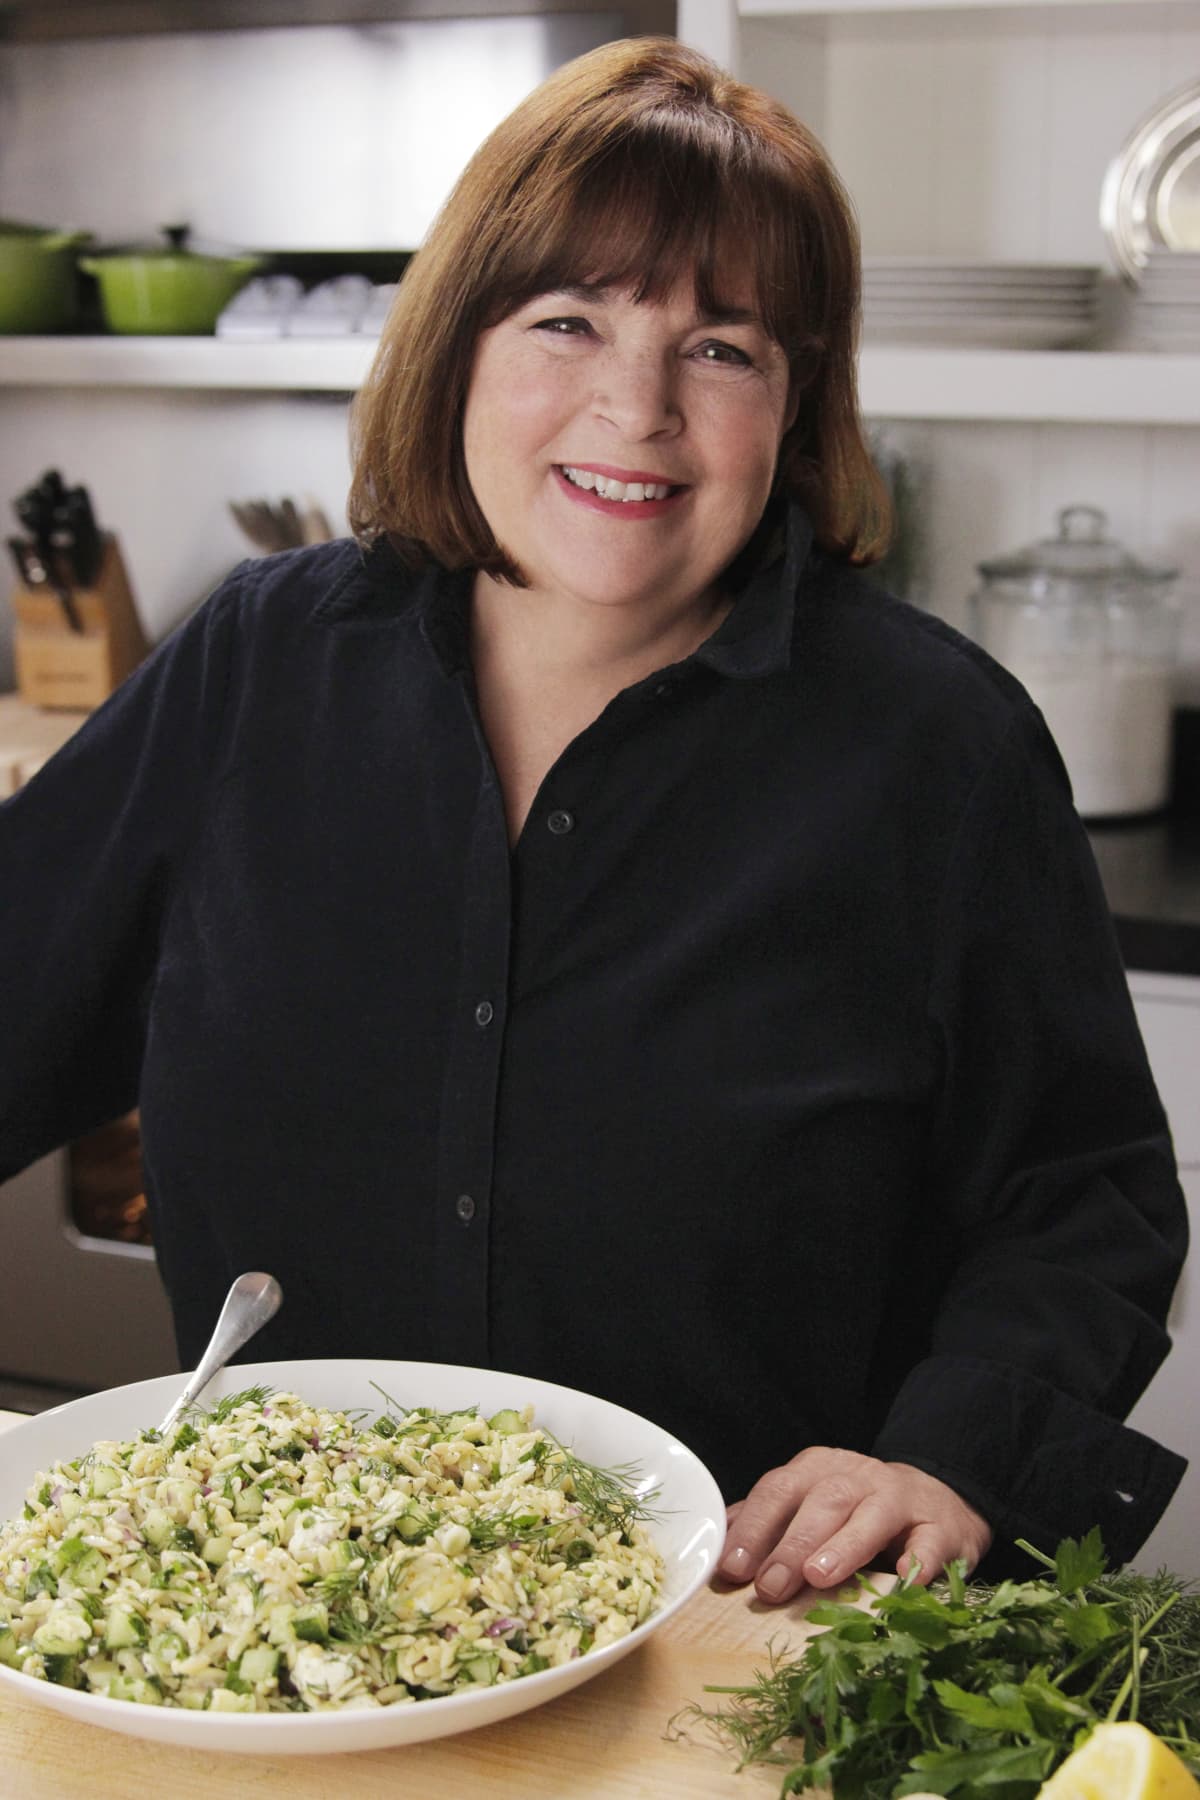 Ina Garten with a plate of food in a kitchen